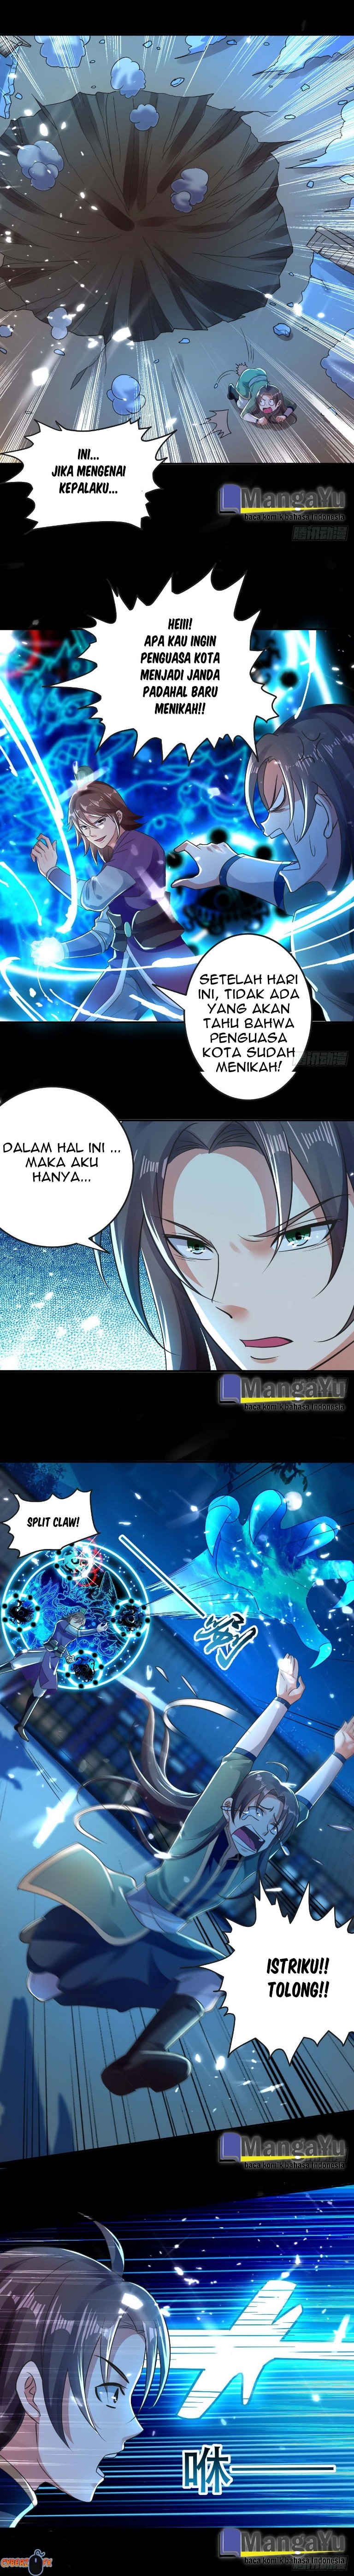 Outsider Super Son In Law Chapter 2 3